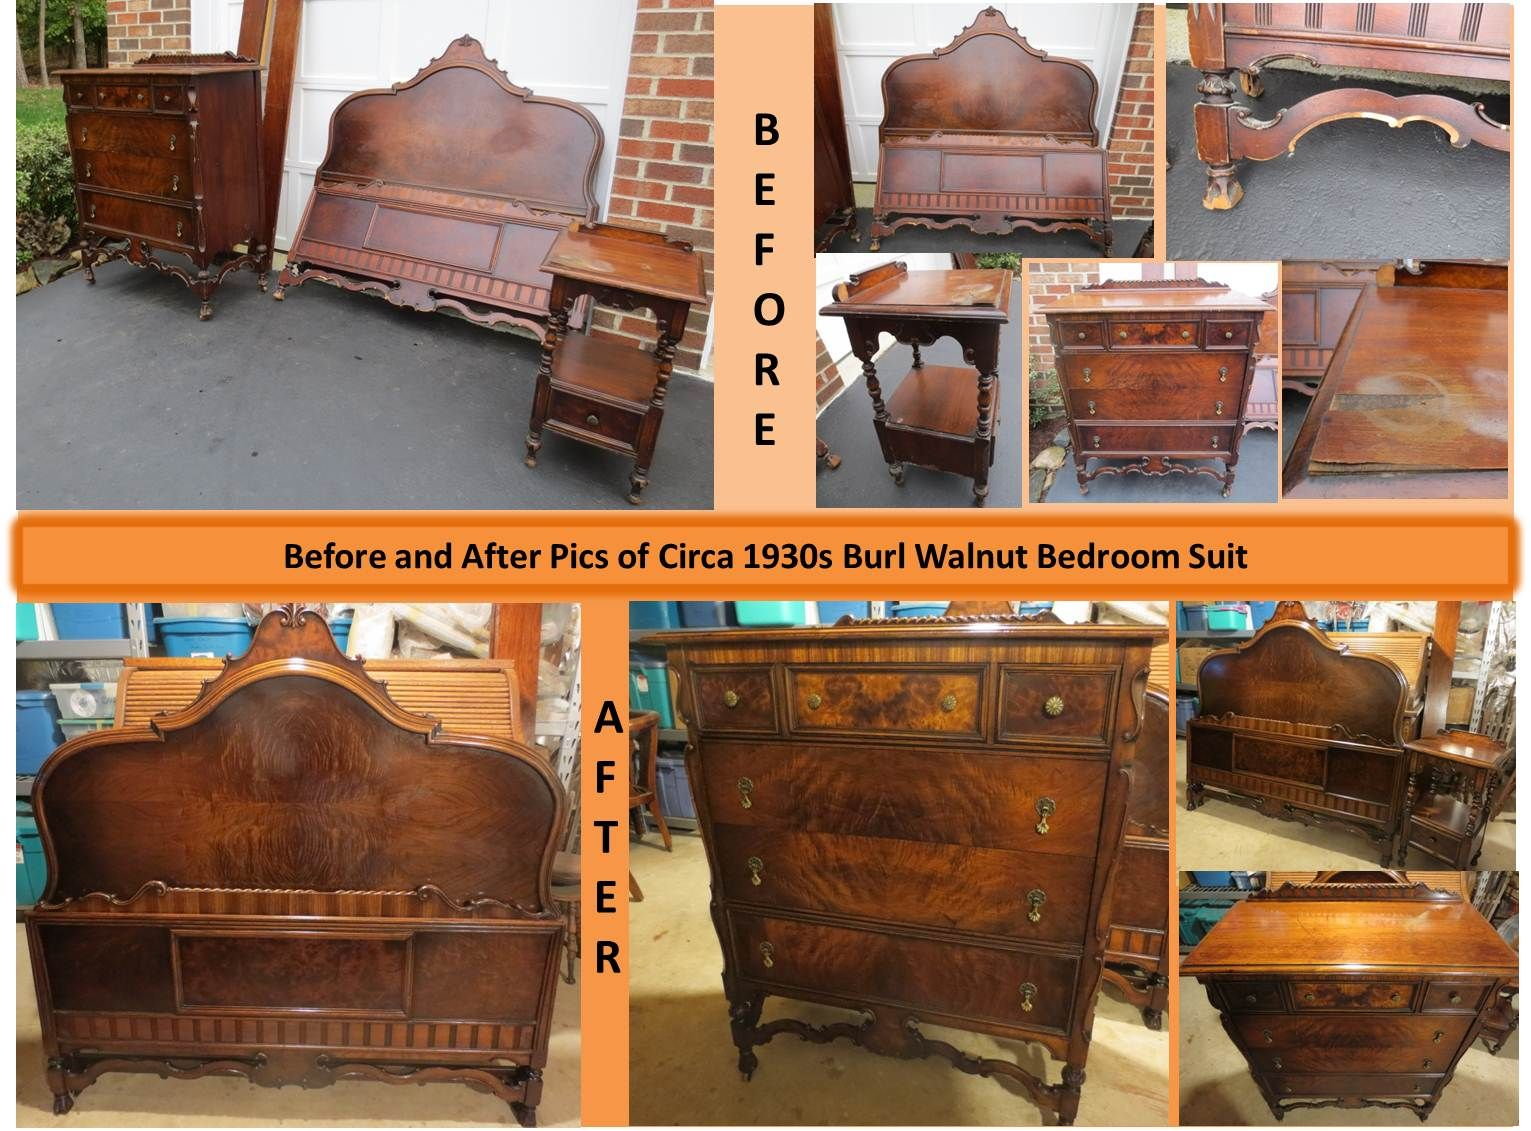 Ca 1920s Burl Walnut Bedroom Suite That I Restoredrefinished Into for sizing 1531 X 1131